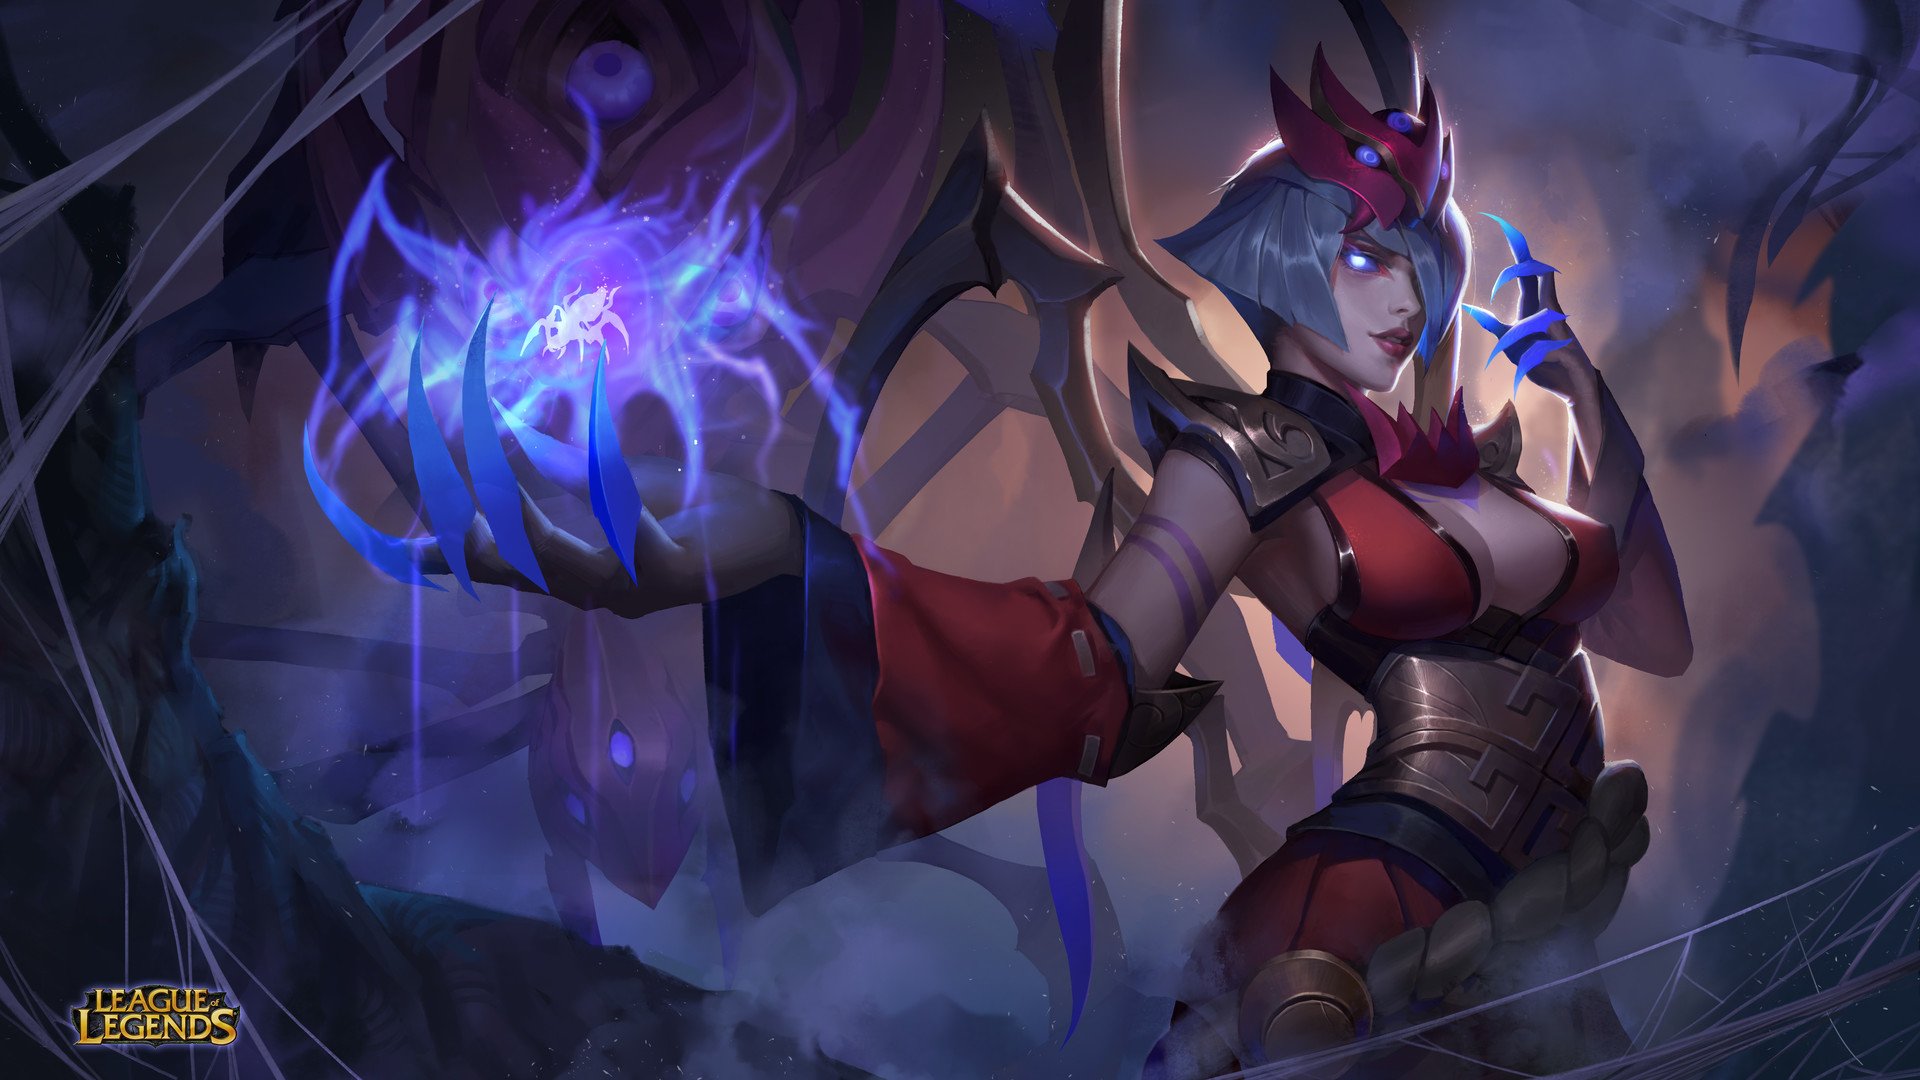 League of Legends Elise wallpaper Resolution 1920x1080 | Best Download this awesome wallpaper - Cool Wallpaper HD - CoolWallpaper-HD.com